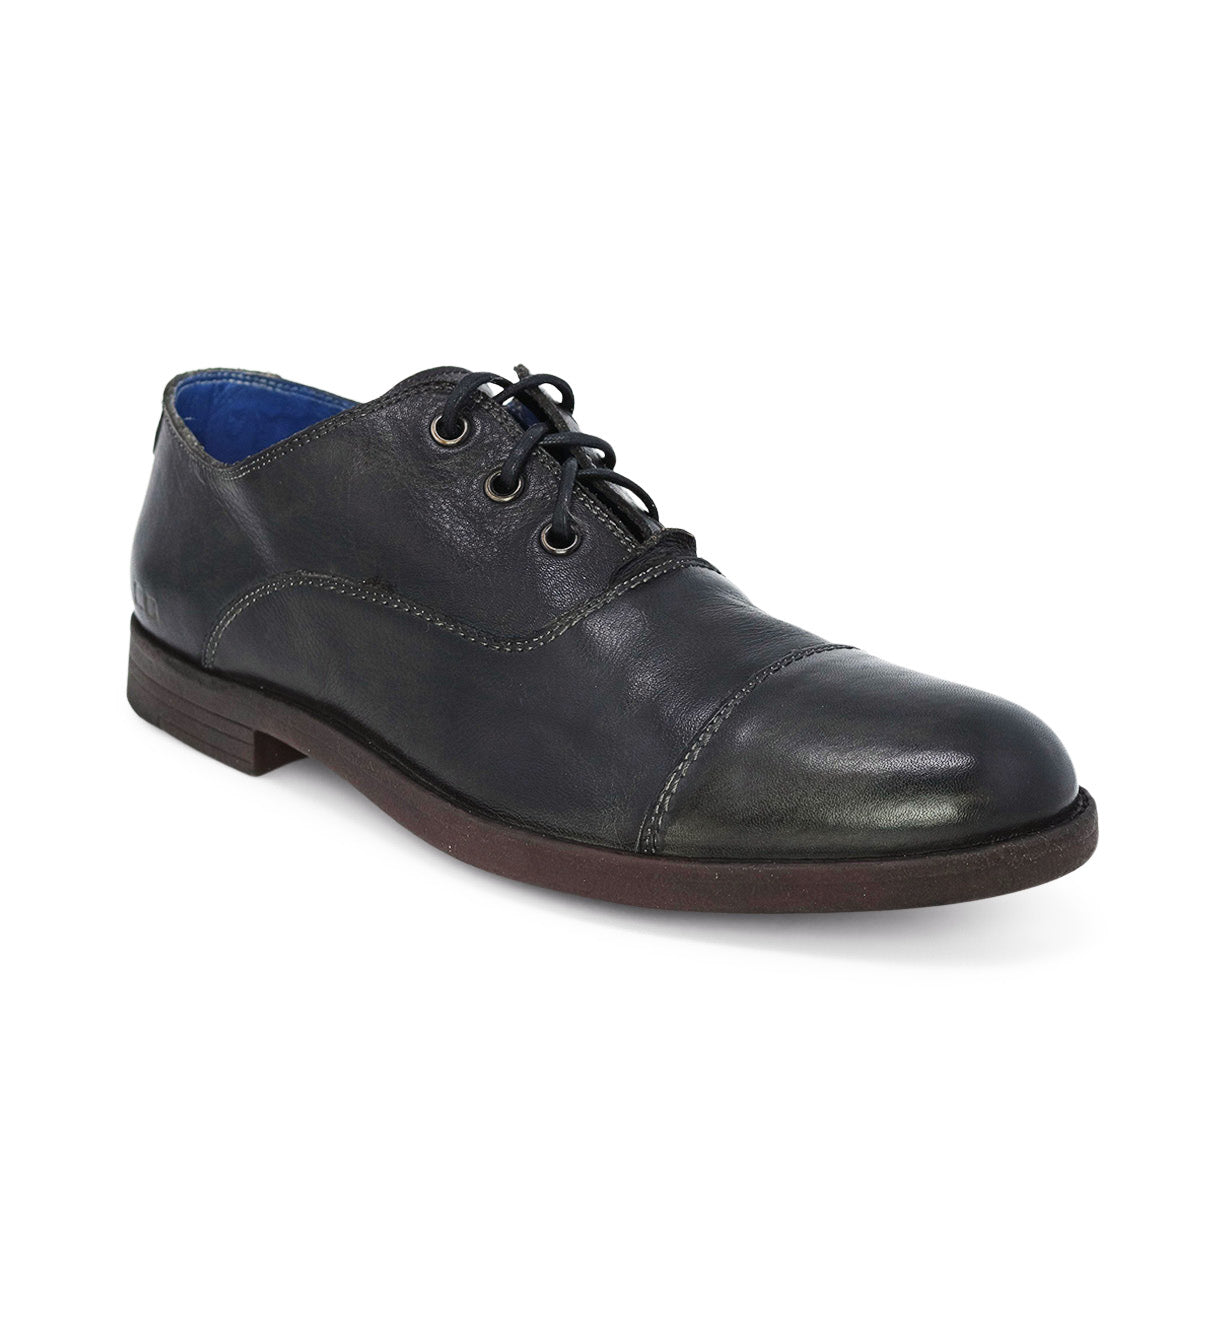 A men's black leather Donatello oxford shoe on a white background, by Bed Stu.